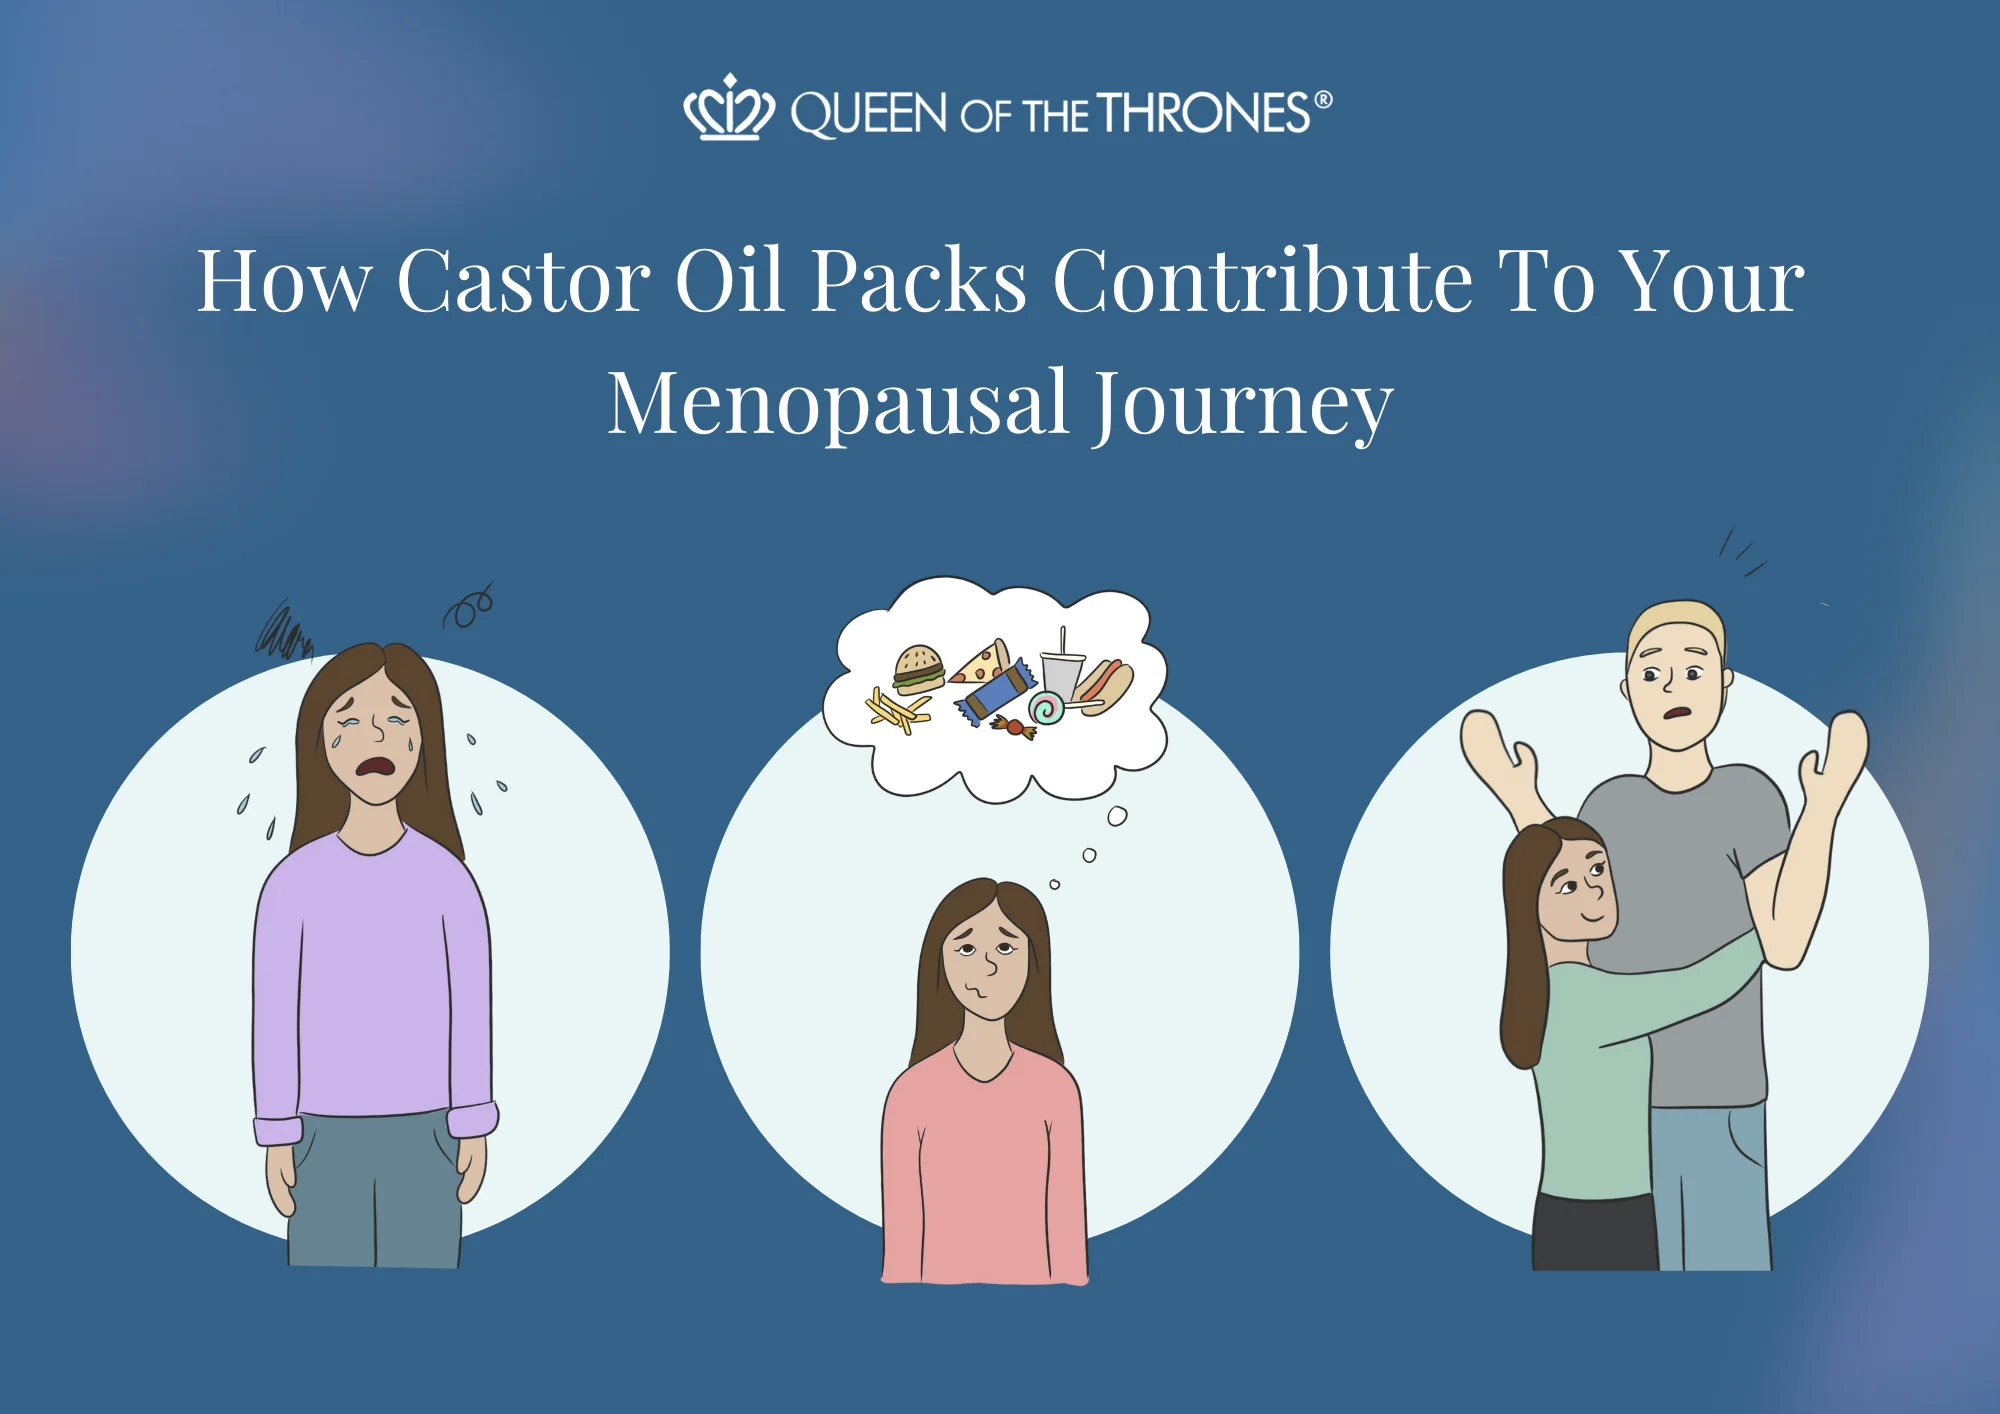 Queen of the Thrones how castor oil packs contribute to menopause